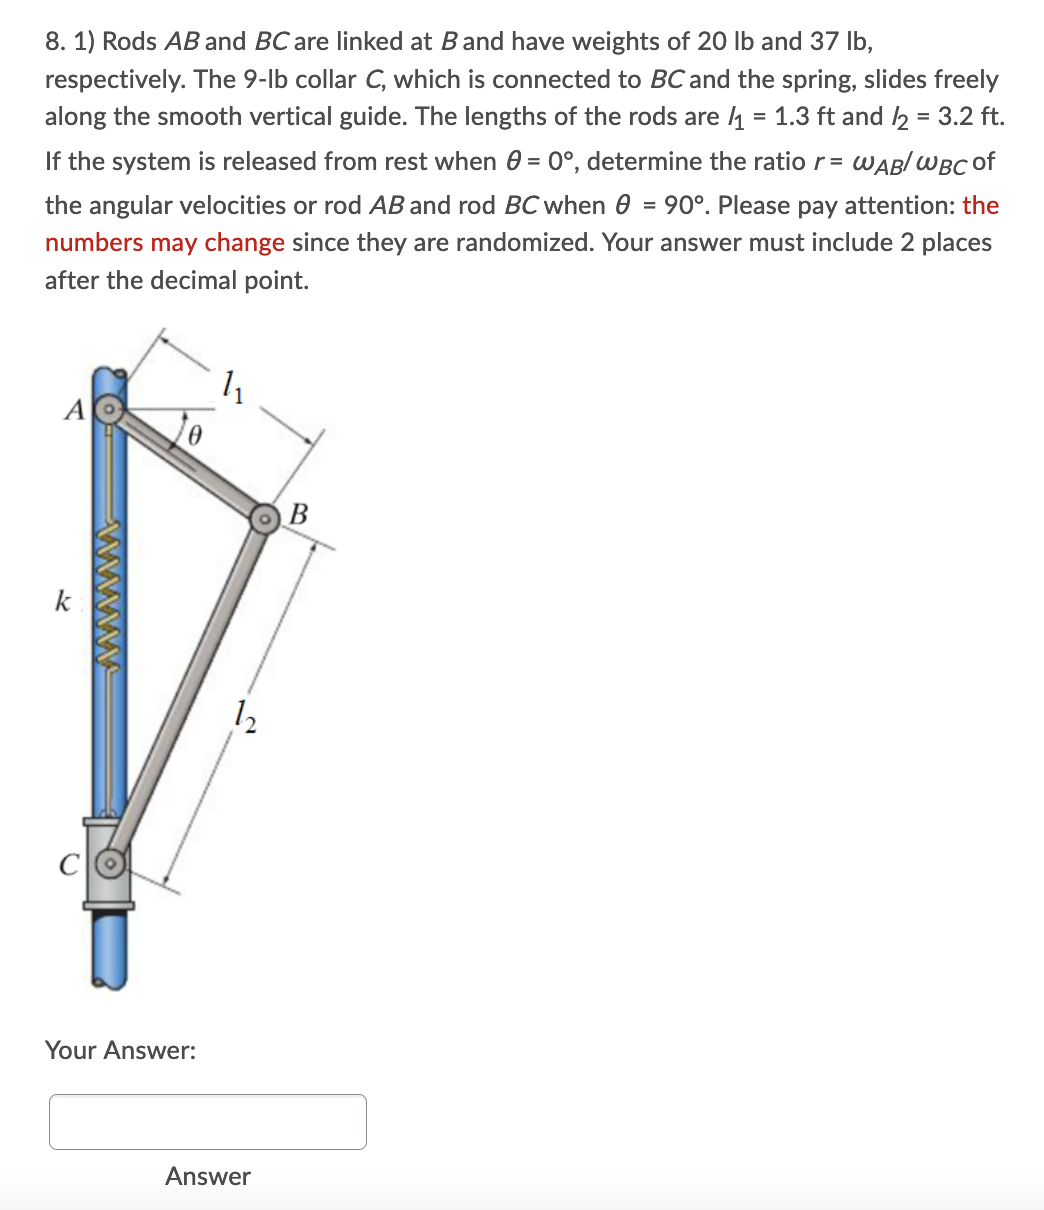 8. 1) Rods AB and BC are linked at Band have weights of 20 lb and 37 Ib,
respectively. The 9-lb collar C, which is connected to BC and the spring, slides freely
along the smooth vertical guide. The lengths of the rods are 4 = 1.3 ft and 2 = 3.2 ft.
If the system is released from rest when 0 = 0°, determine the ratio r= WABI WBC of
the angular velocities or rod AB and rod BC when e = 90°. Please pay attention: the
numbers may change since they are randomized. Your answer must include 2 places
after the decimal point.
11
A
В
k
C
Your Answer:
Answer
